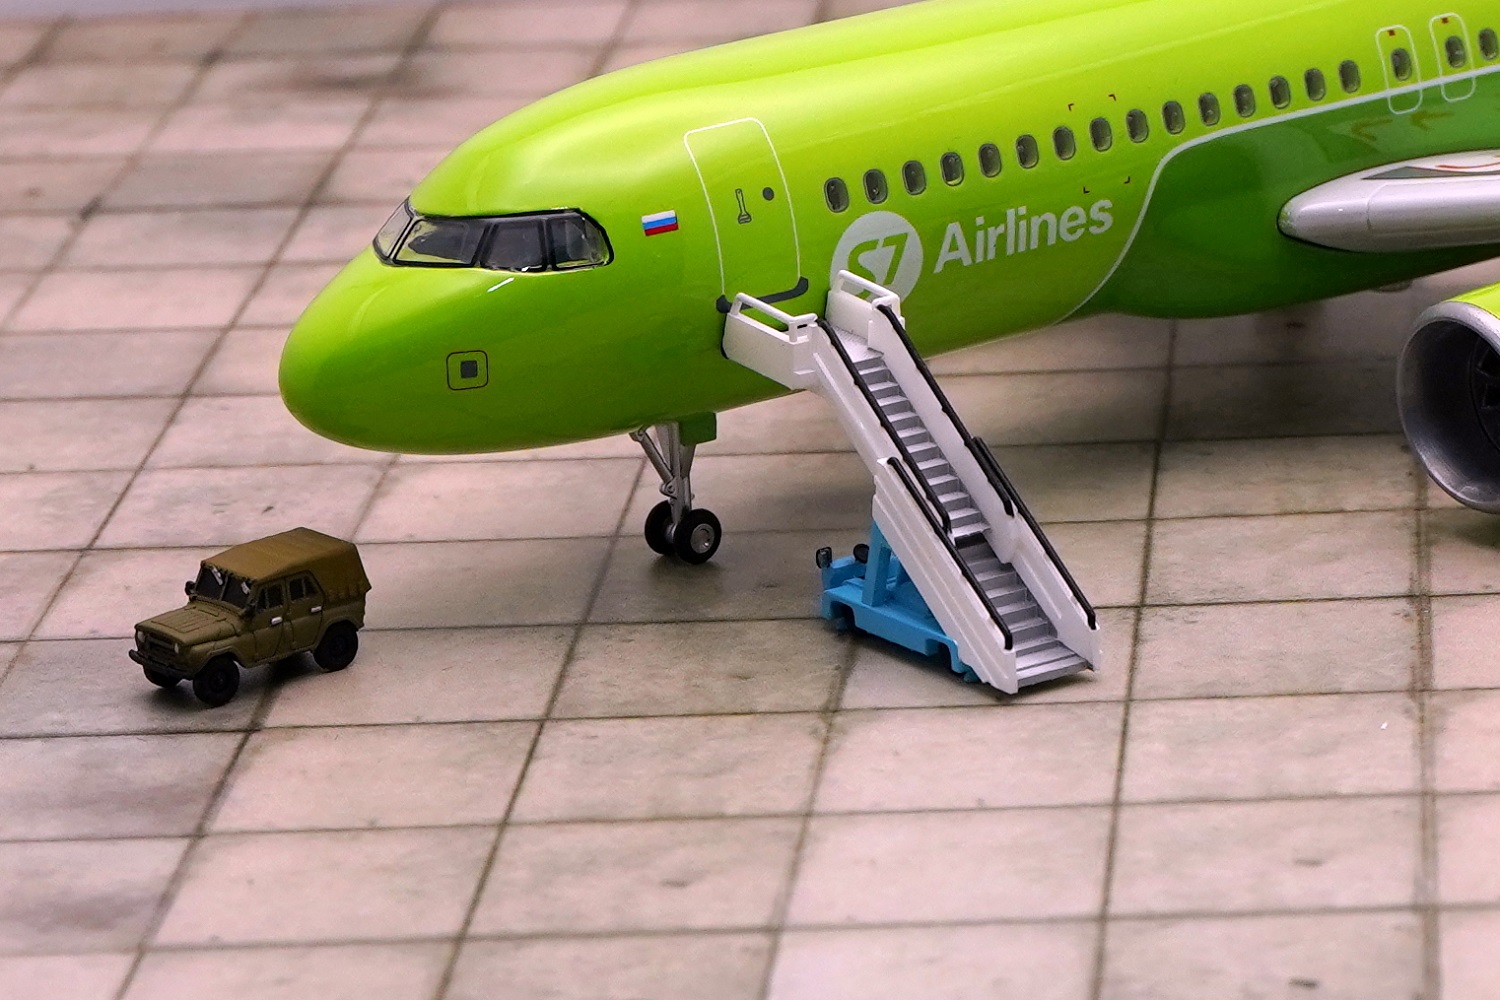   Airbus A320 Neo,  S7 Airlines .    .  # 9 hobbyplus.ru